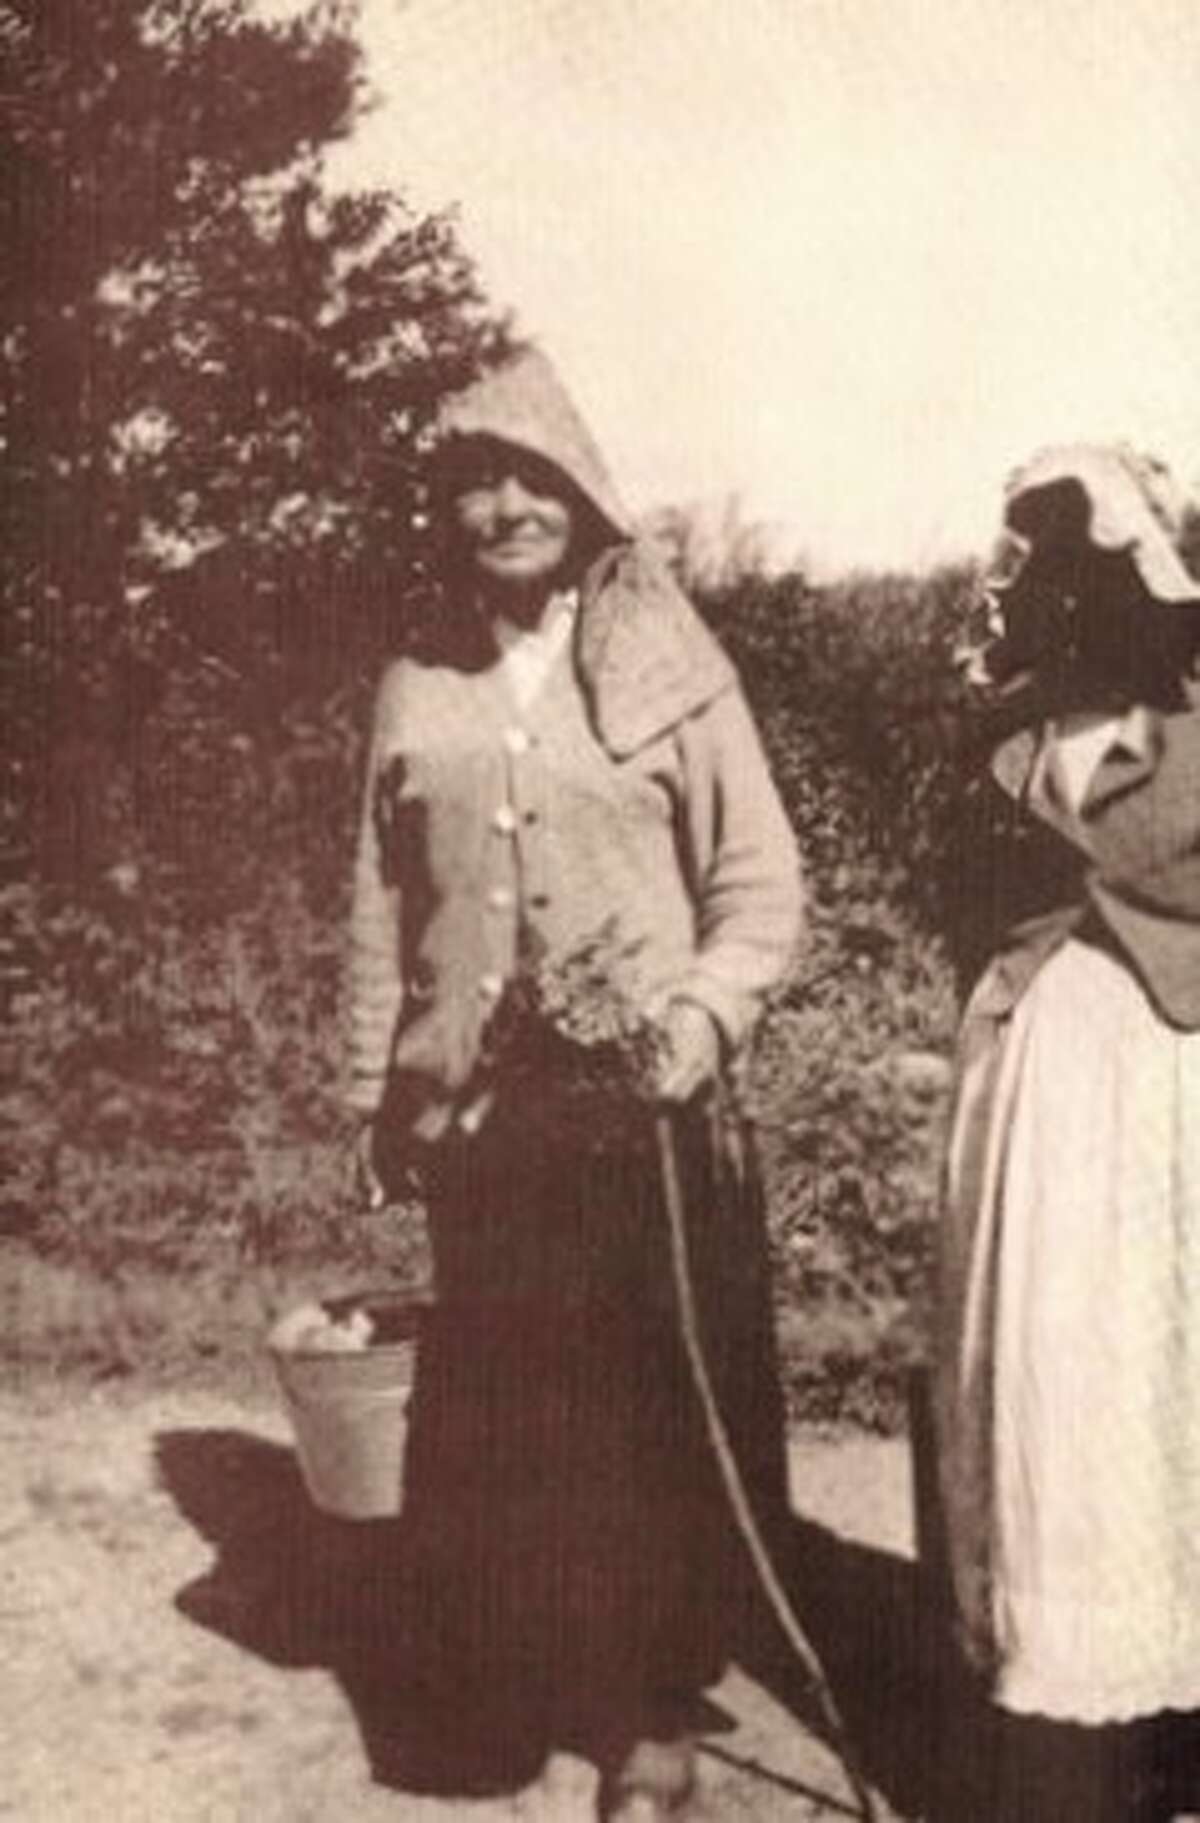 Taken in the first decade of the 20th century, it shows two women going to pick blueberries to sell to pay their taxes, and it's the photo that inspired the creation of the Austerlitz festival.